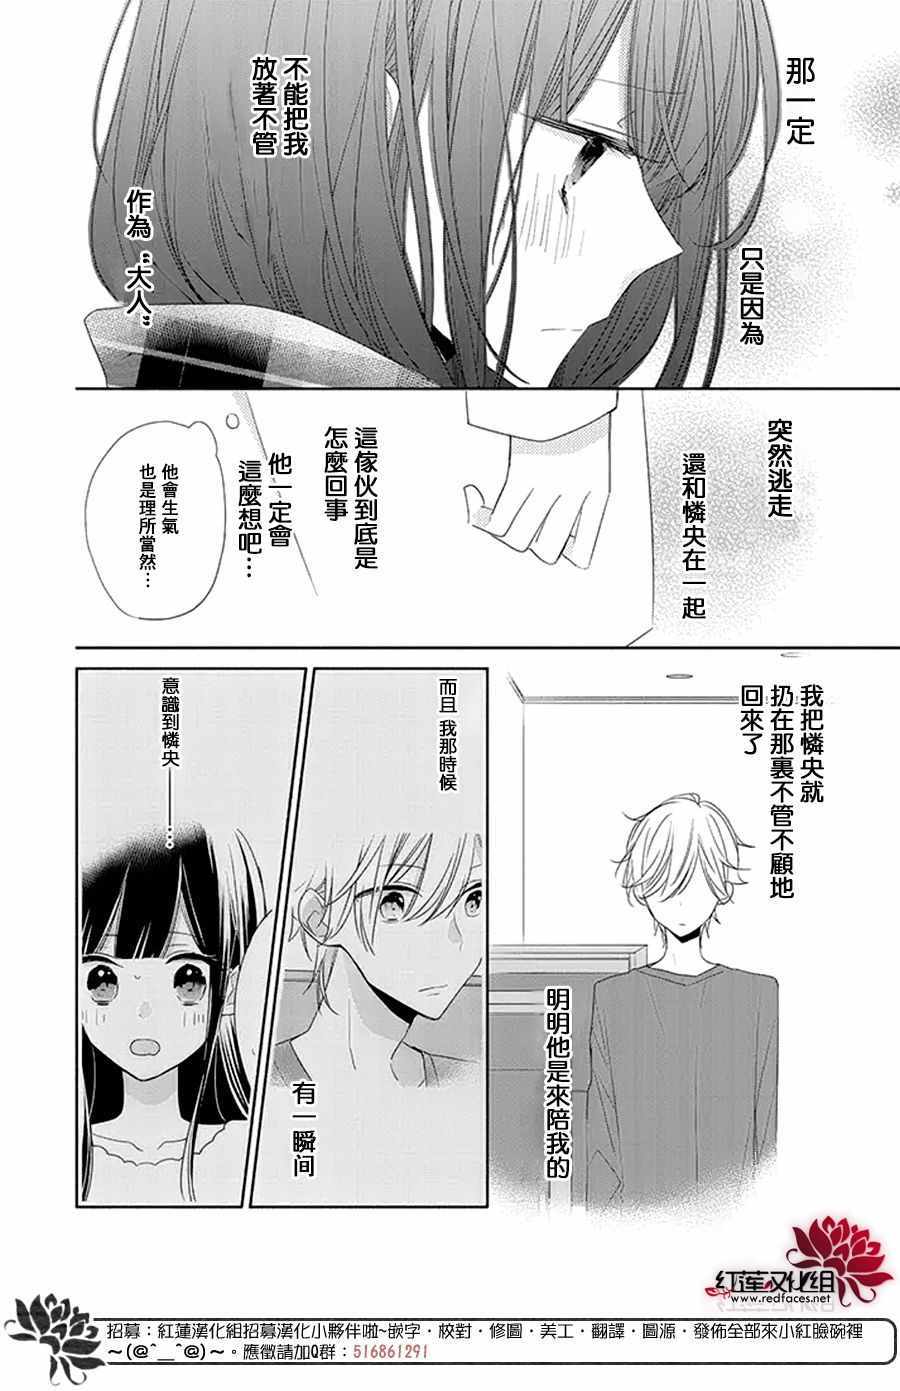 If given a second chance - 20話 - 6